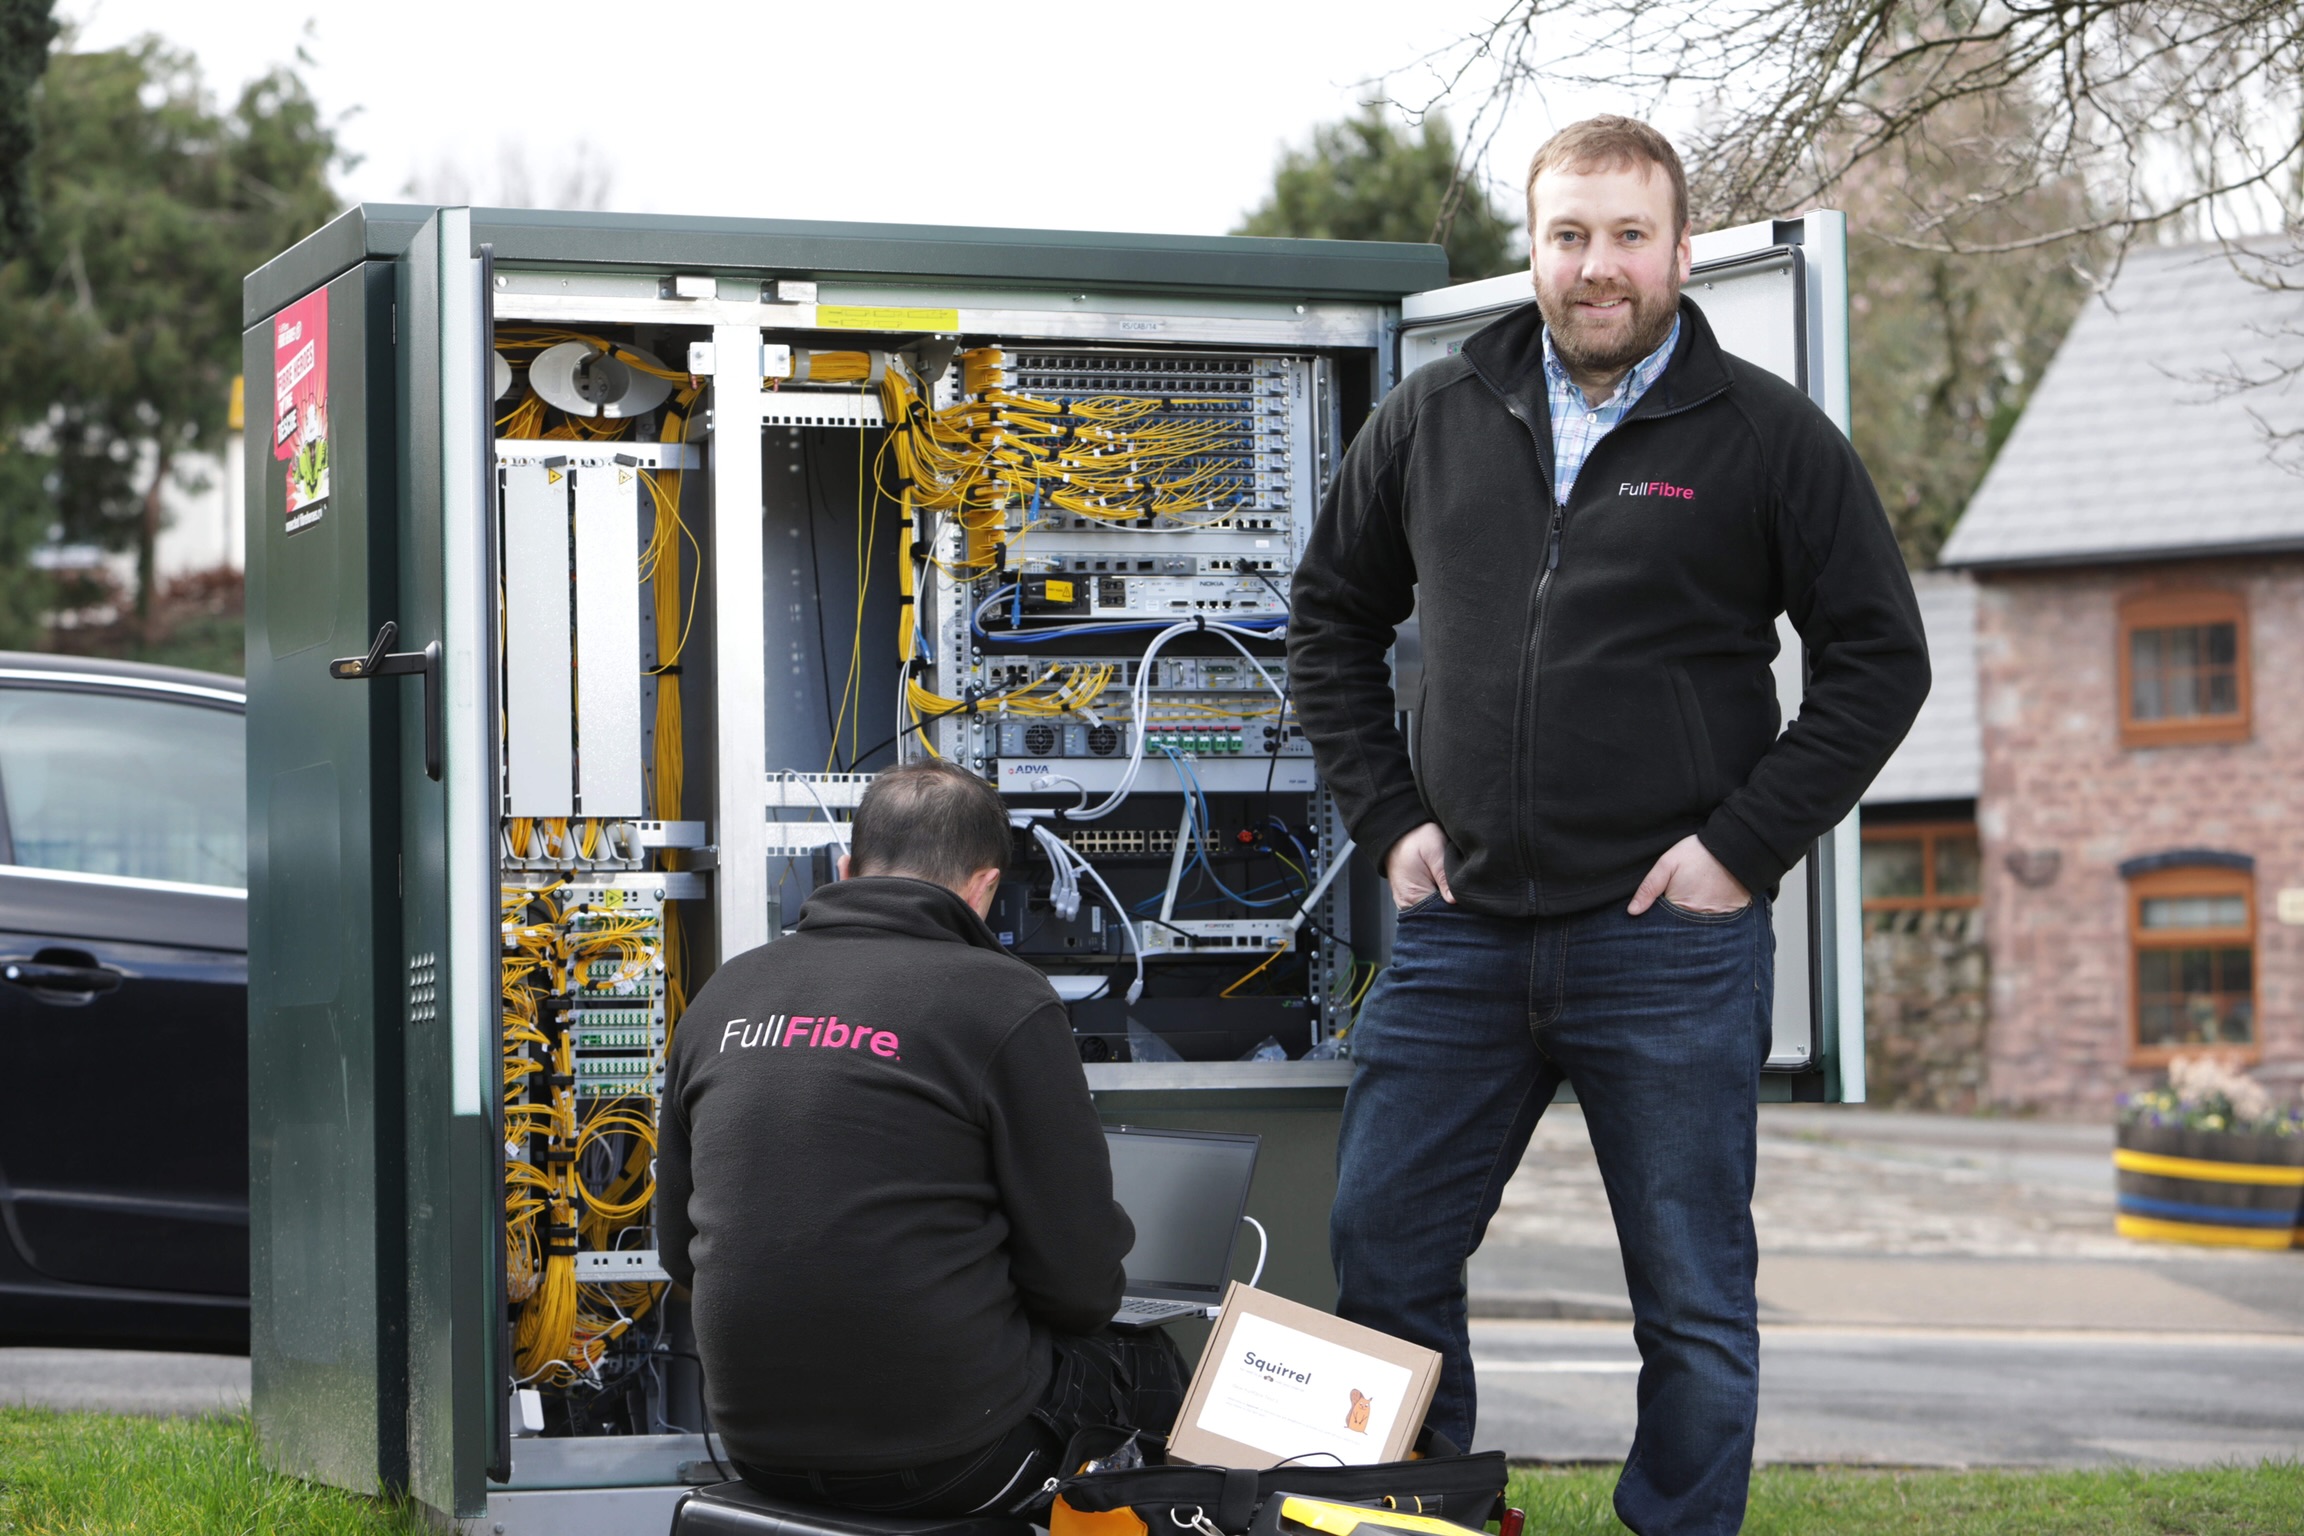 NEWS | Faster Broadband on the way to Ross-on-Wye Residents Thanks to Fibre Heroes